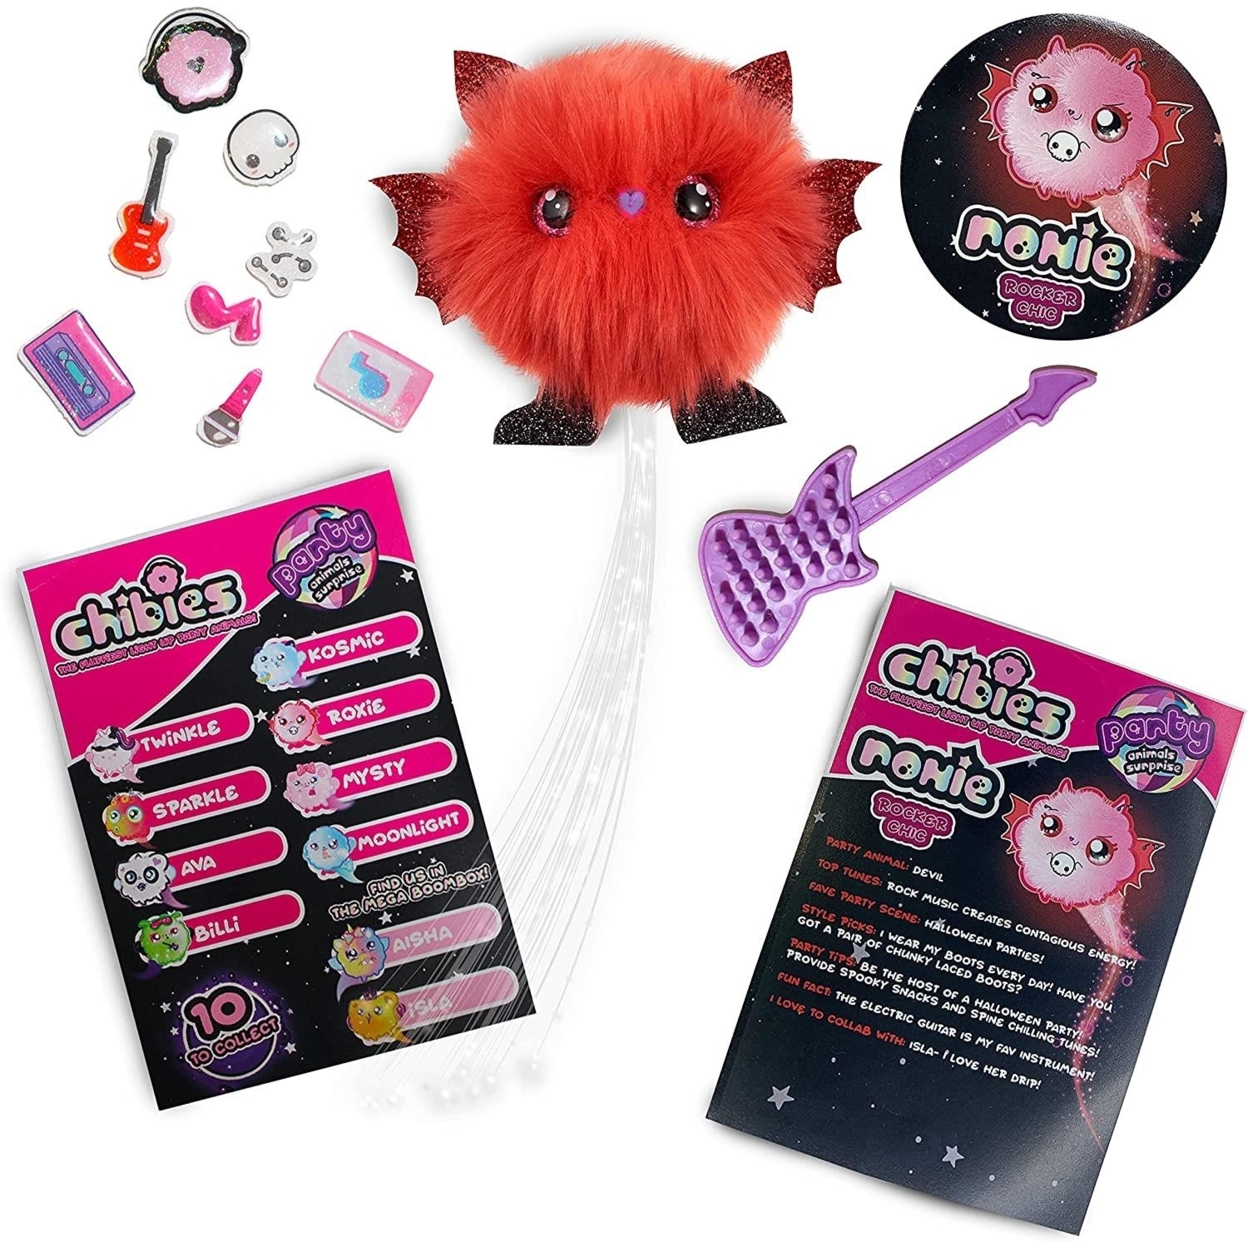 Chibies Boom Box Roxie Fluffy Lights To Beats Speaker Music Interactive Toy WOW! Stuff